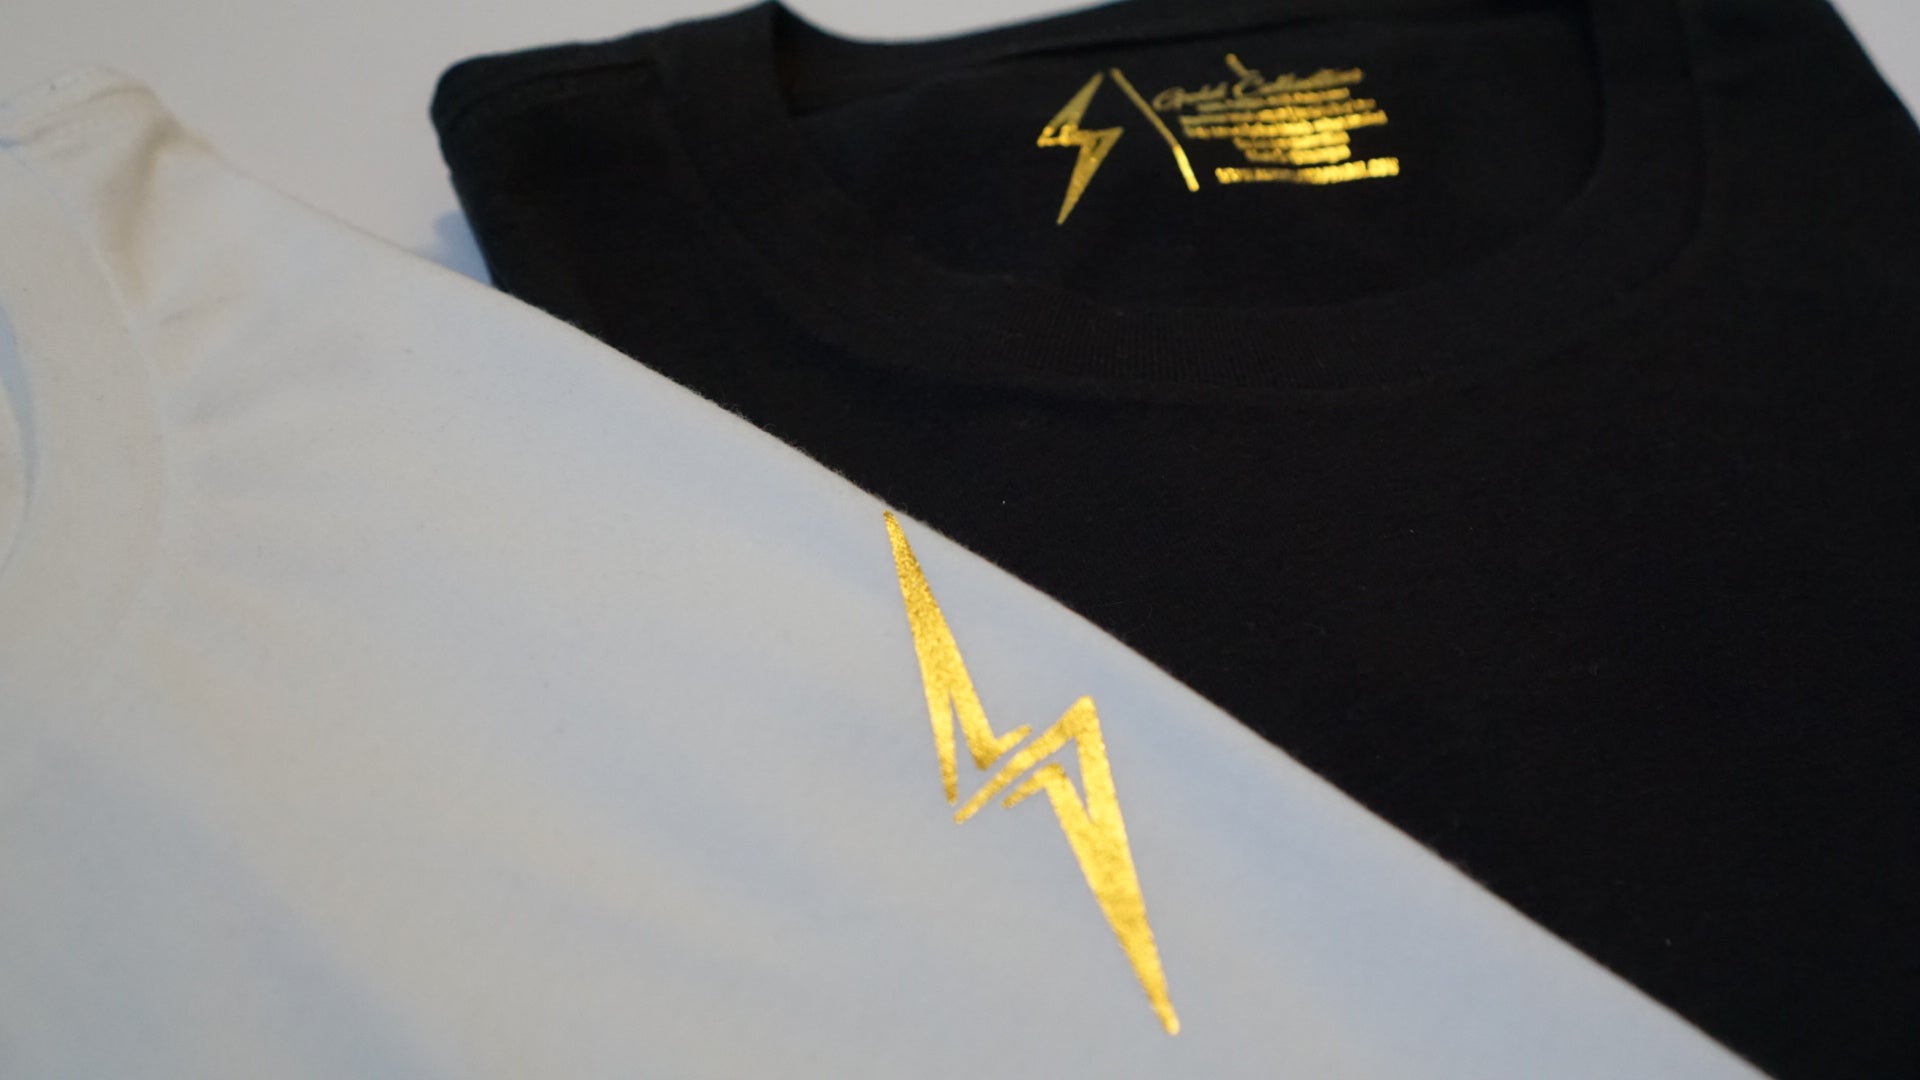 Gold Collection Unisex Tee-White/Gold